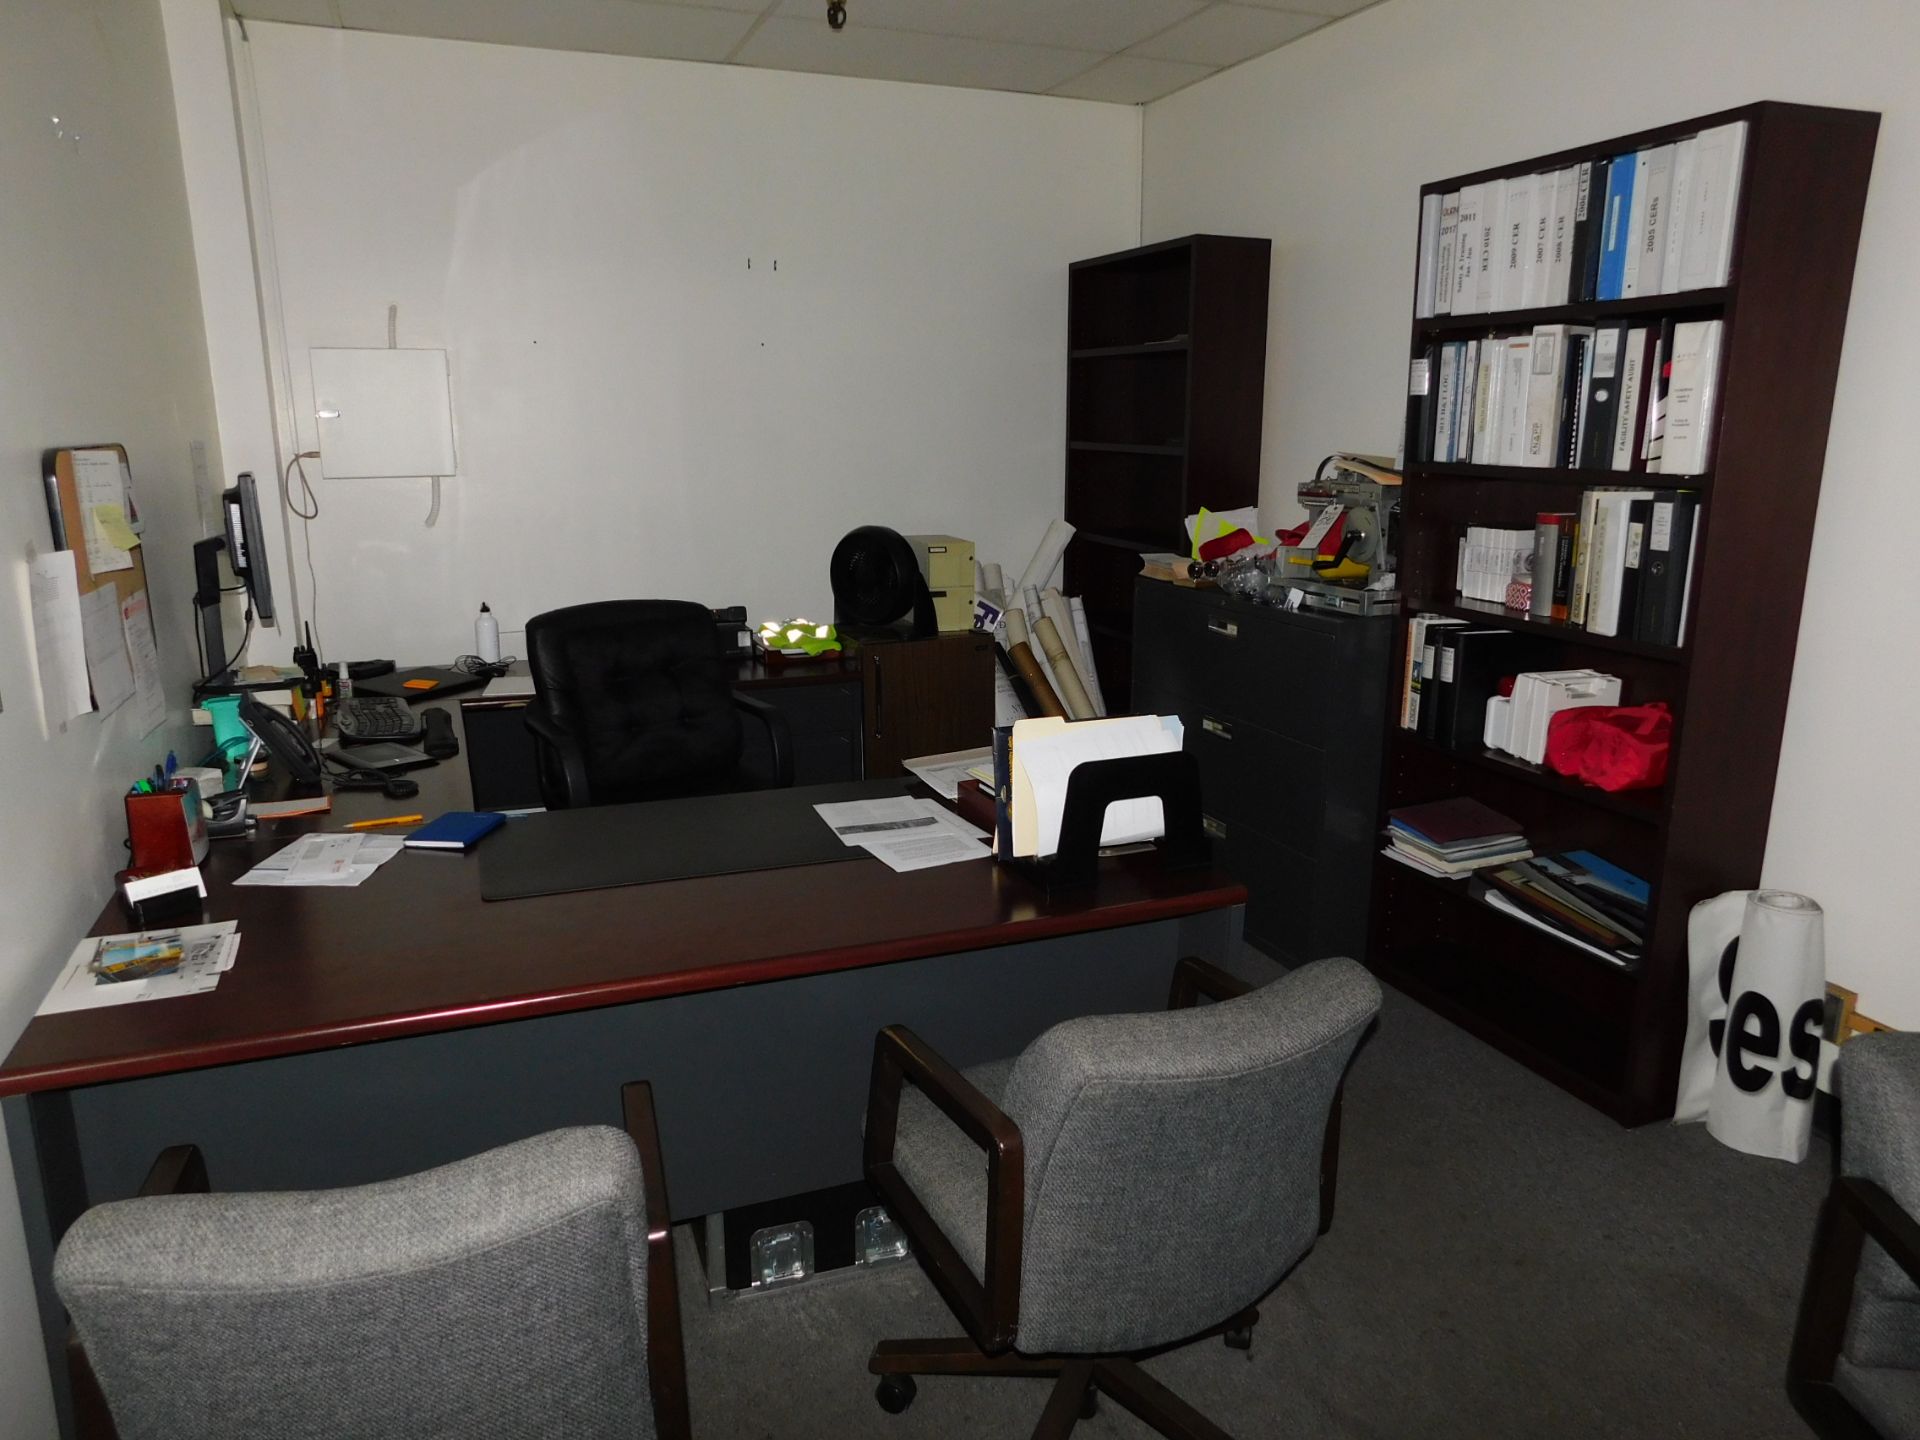 (Lot) Office Furniture in Room (No PC or Phone)